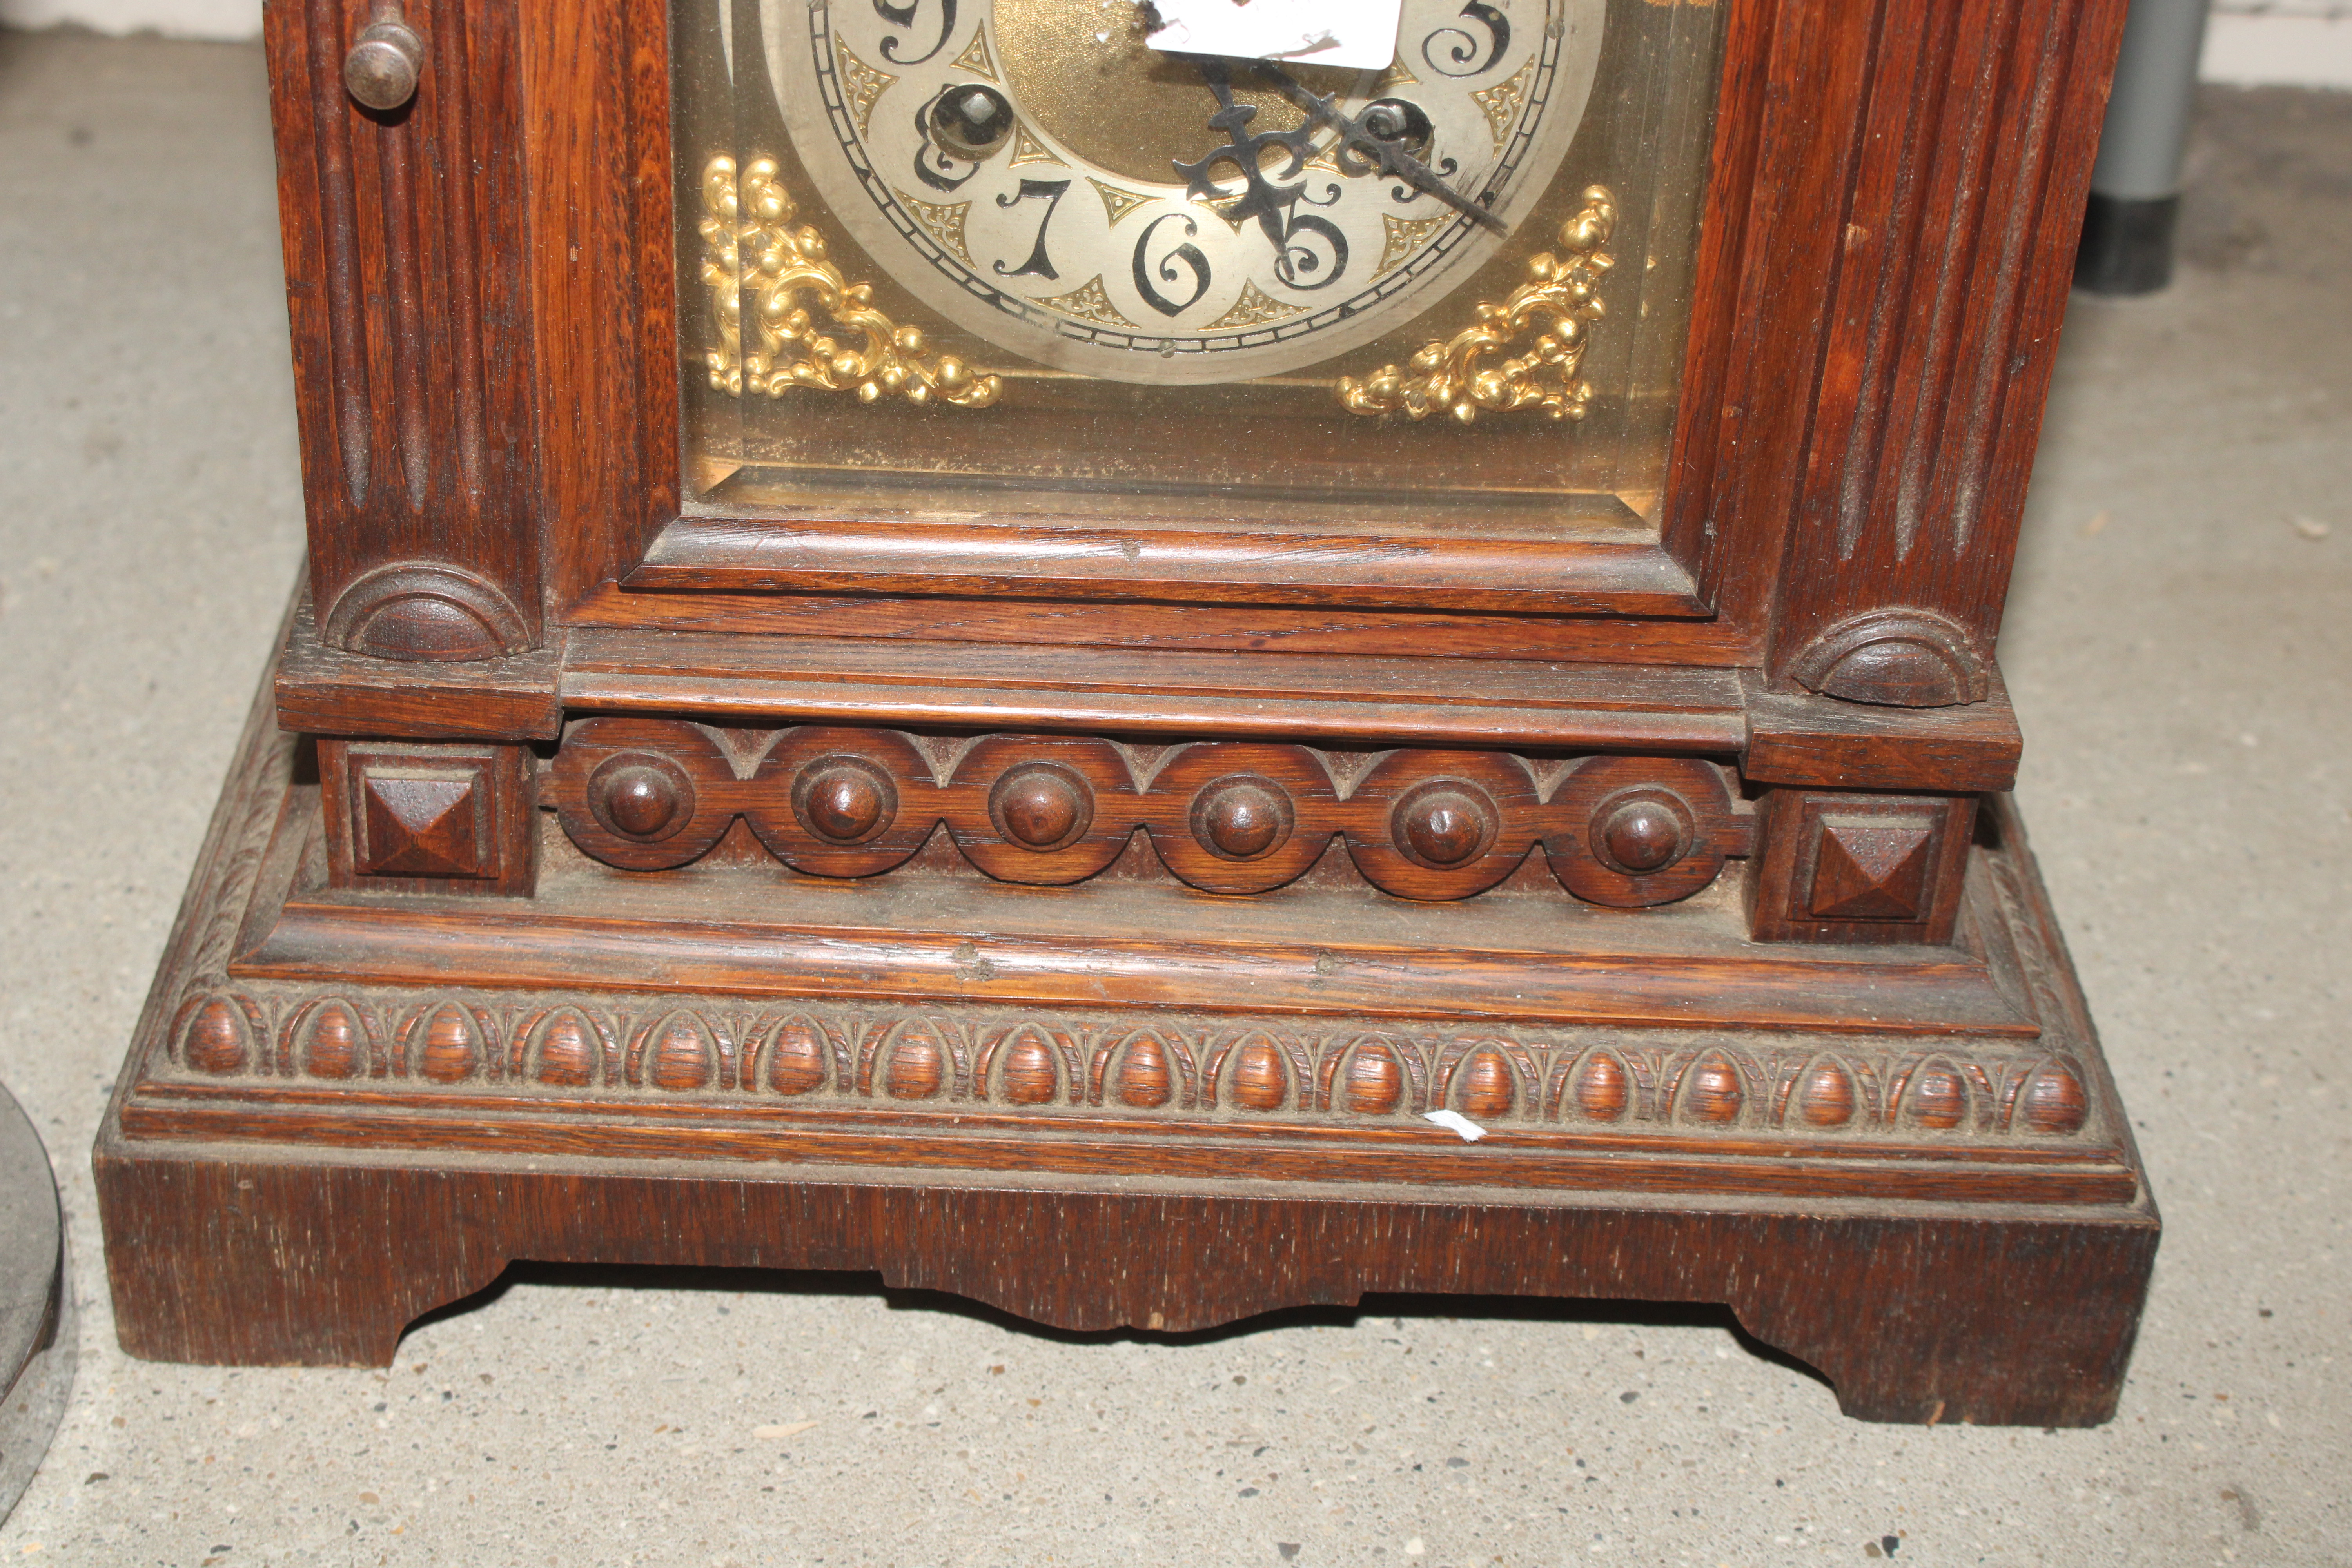 An Edwardian mantel clock; a small 1920's timepiec - Image 6 of 14